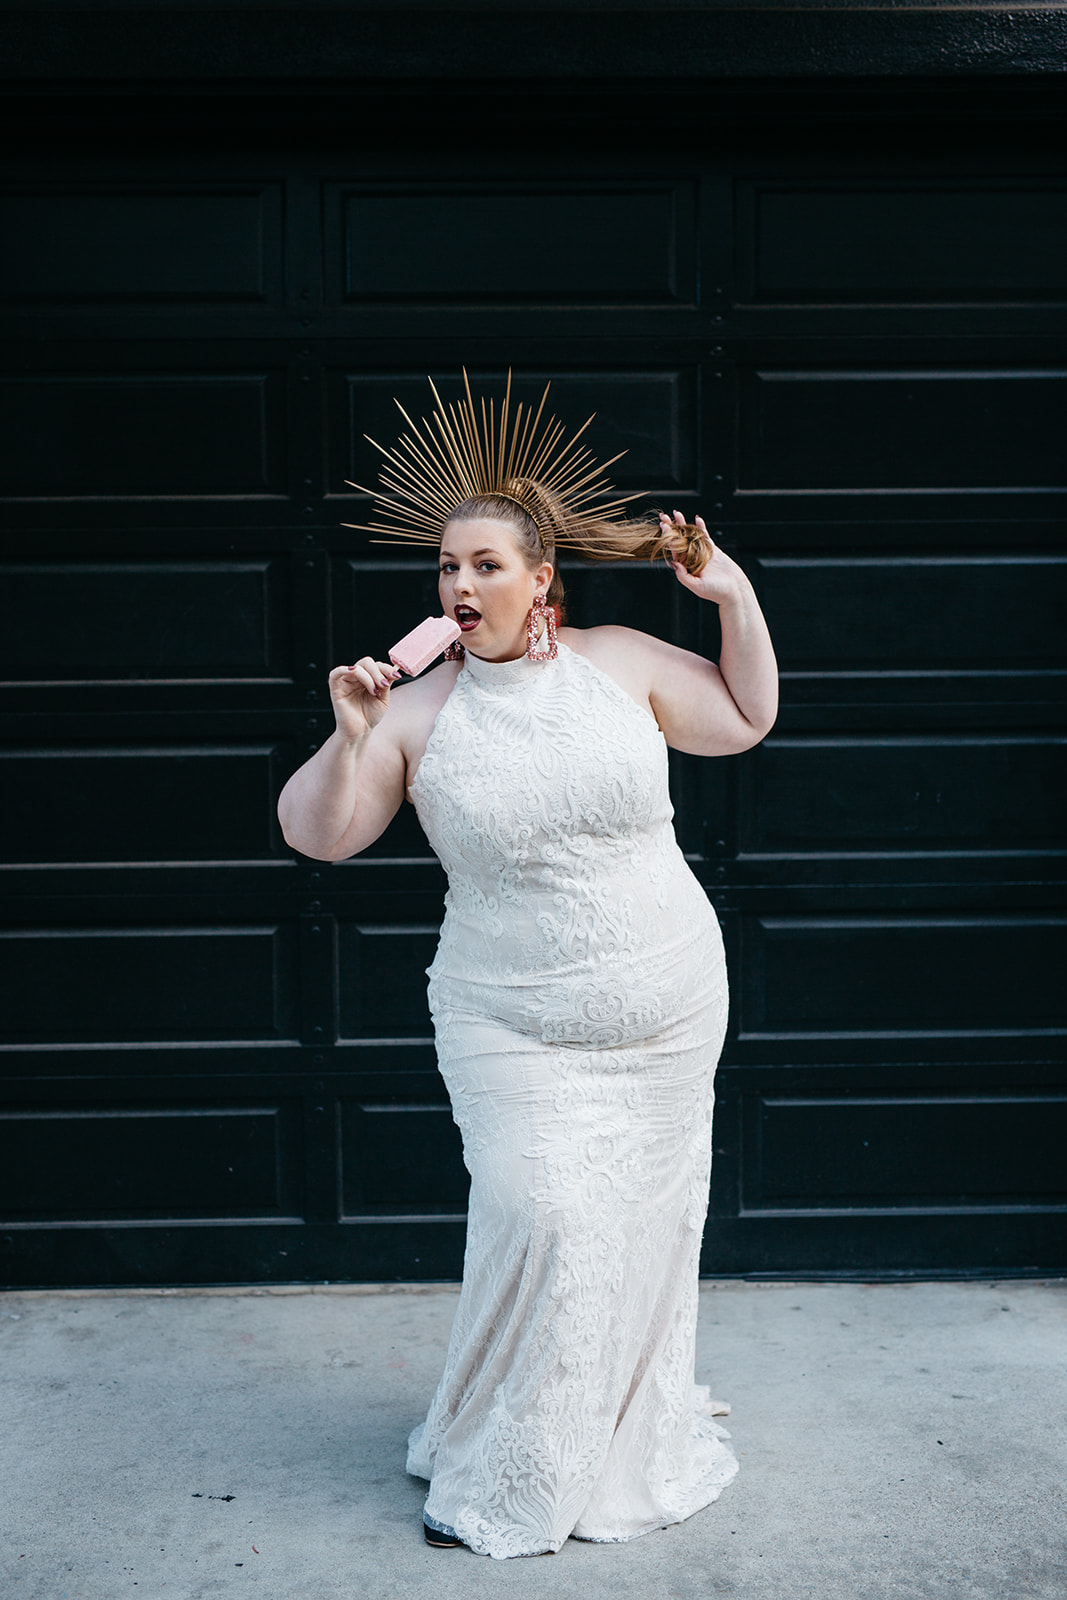 plus size model wearing a high neck halter all over lace gown from the a practical wedding plus size wedding dress collection in front of a black wall and eating ice cream